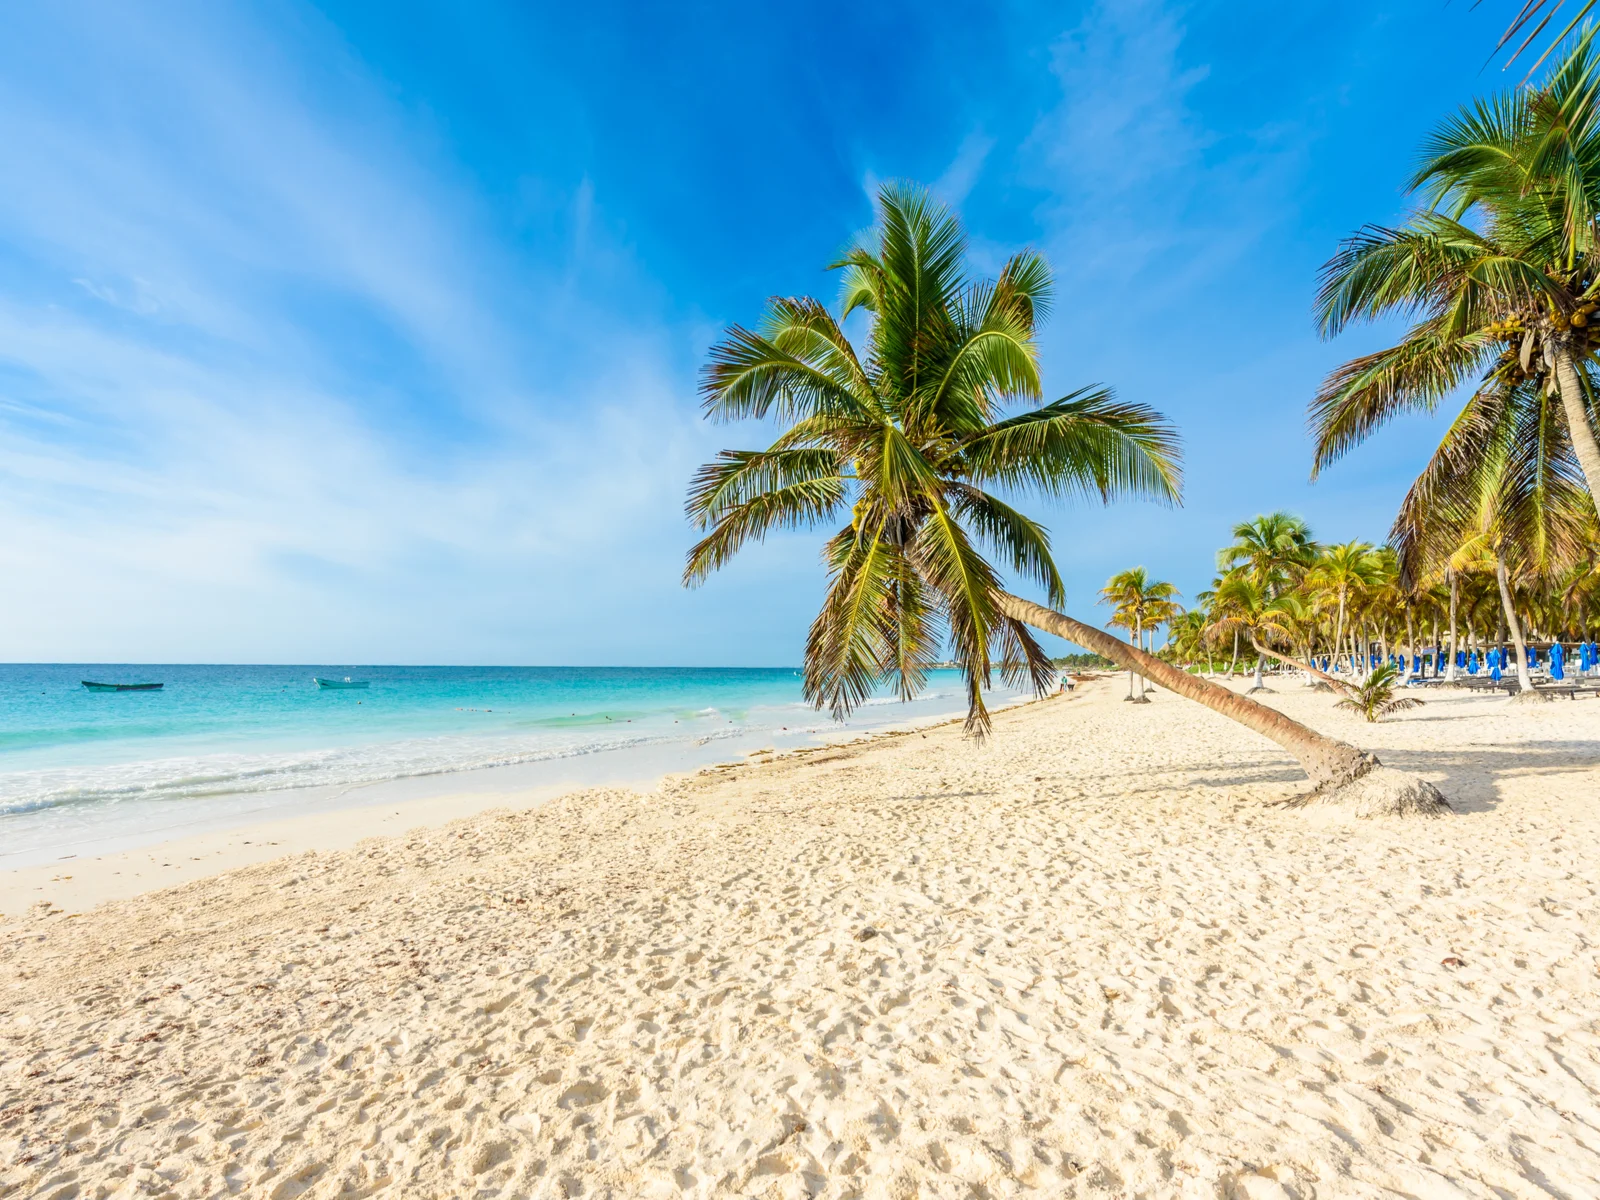 A Coconut tree seen bent towards the sea at Tulum Beach as a piece on one of the best beaches in Cancun, and other Coconuts in background planted on fine sand